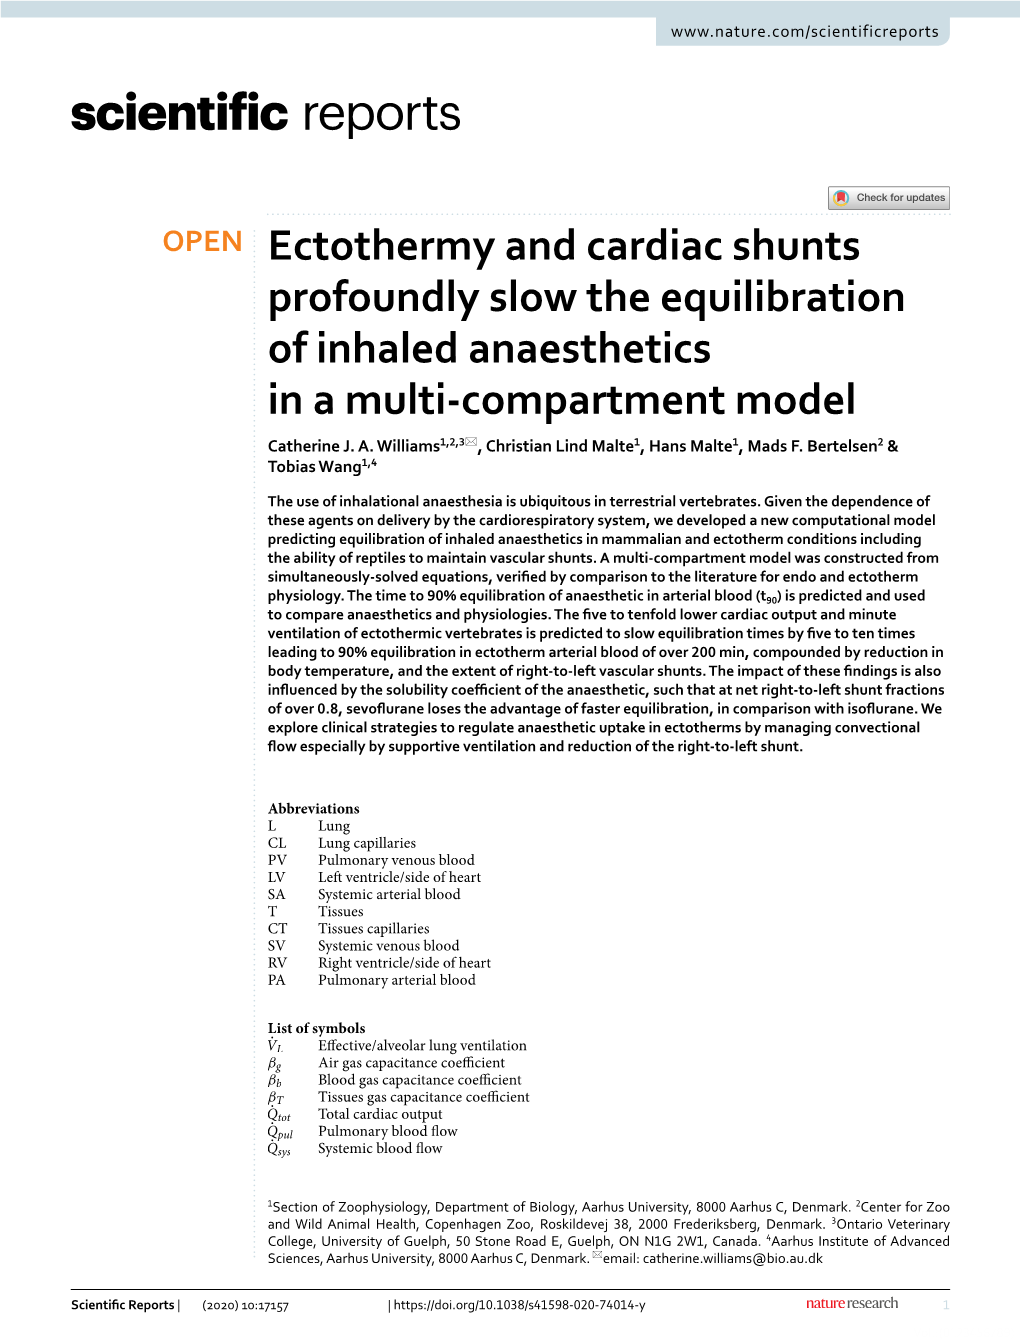 Ectothermy and Cardiac Shunts Profoundly Slow the Equilibration of Inhaled Anaesthetics in a Multi-Compartment Model